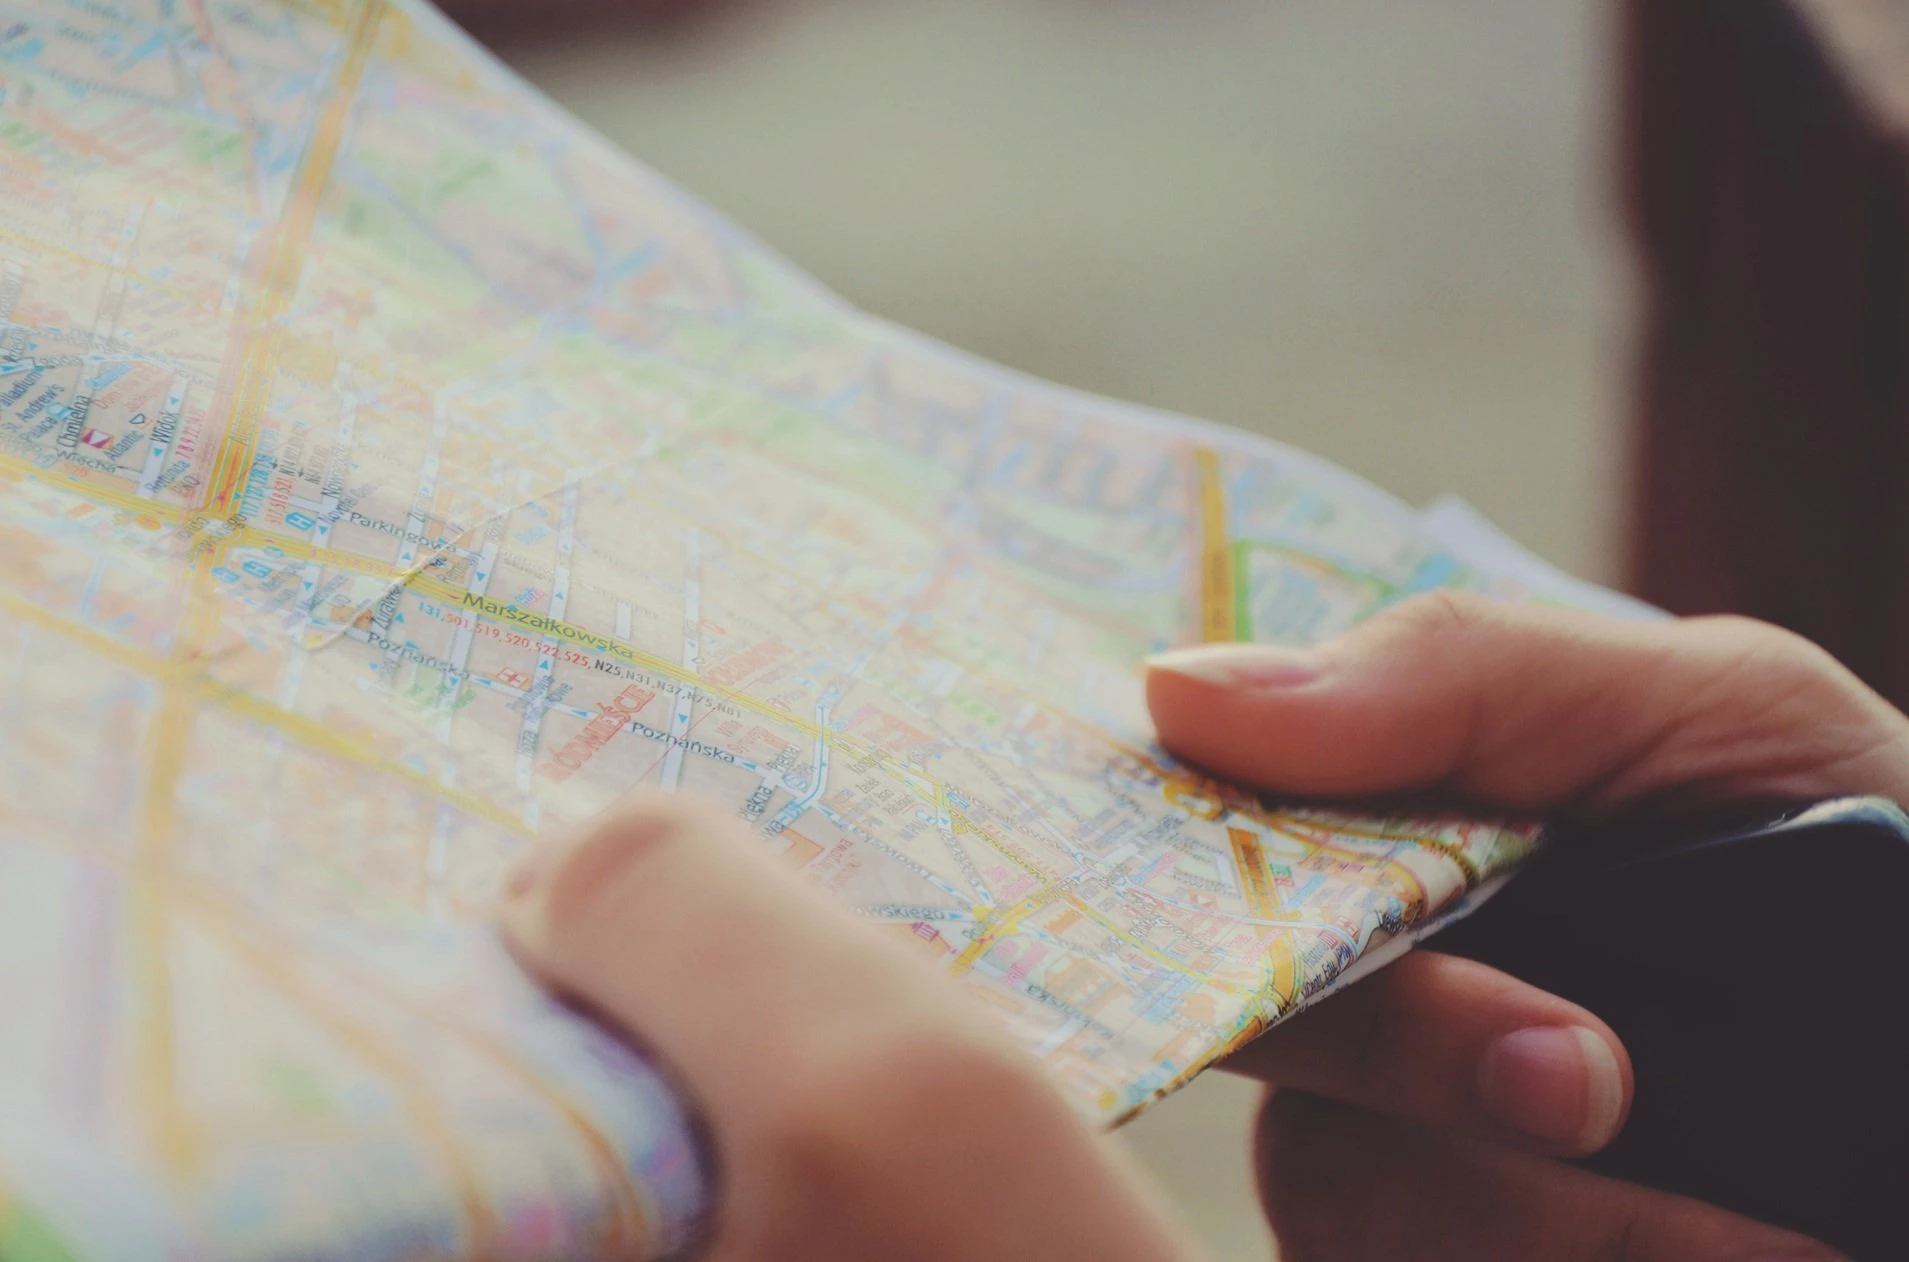 A person map reading to plan a journey